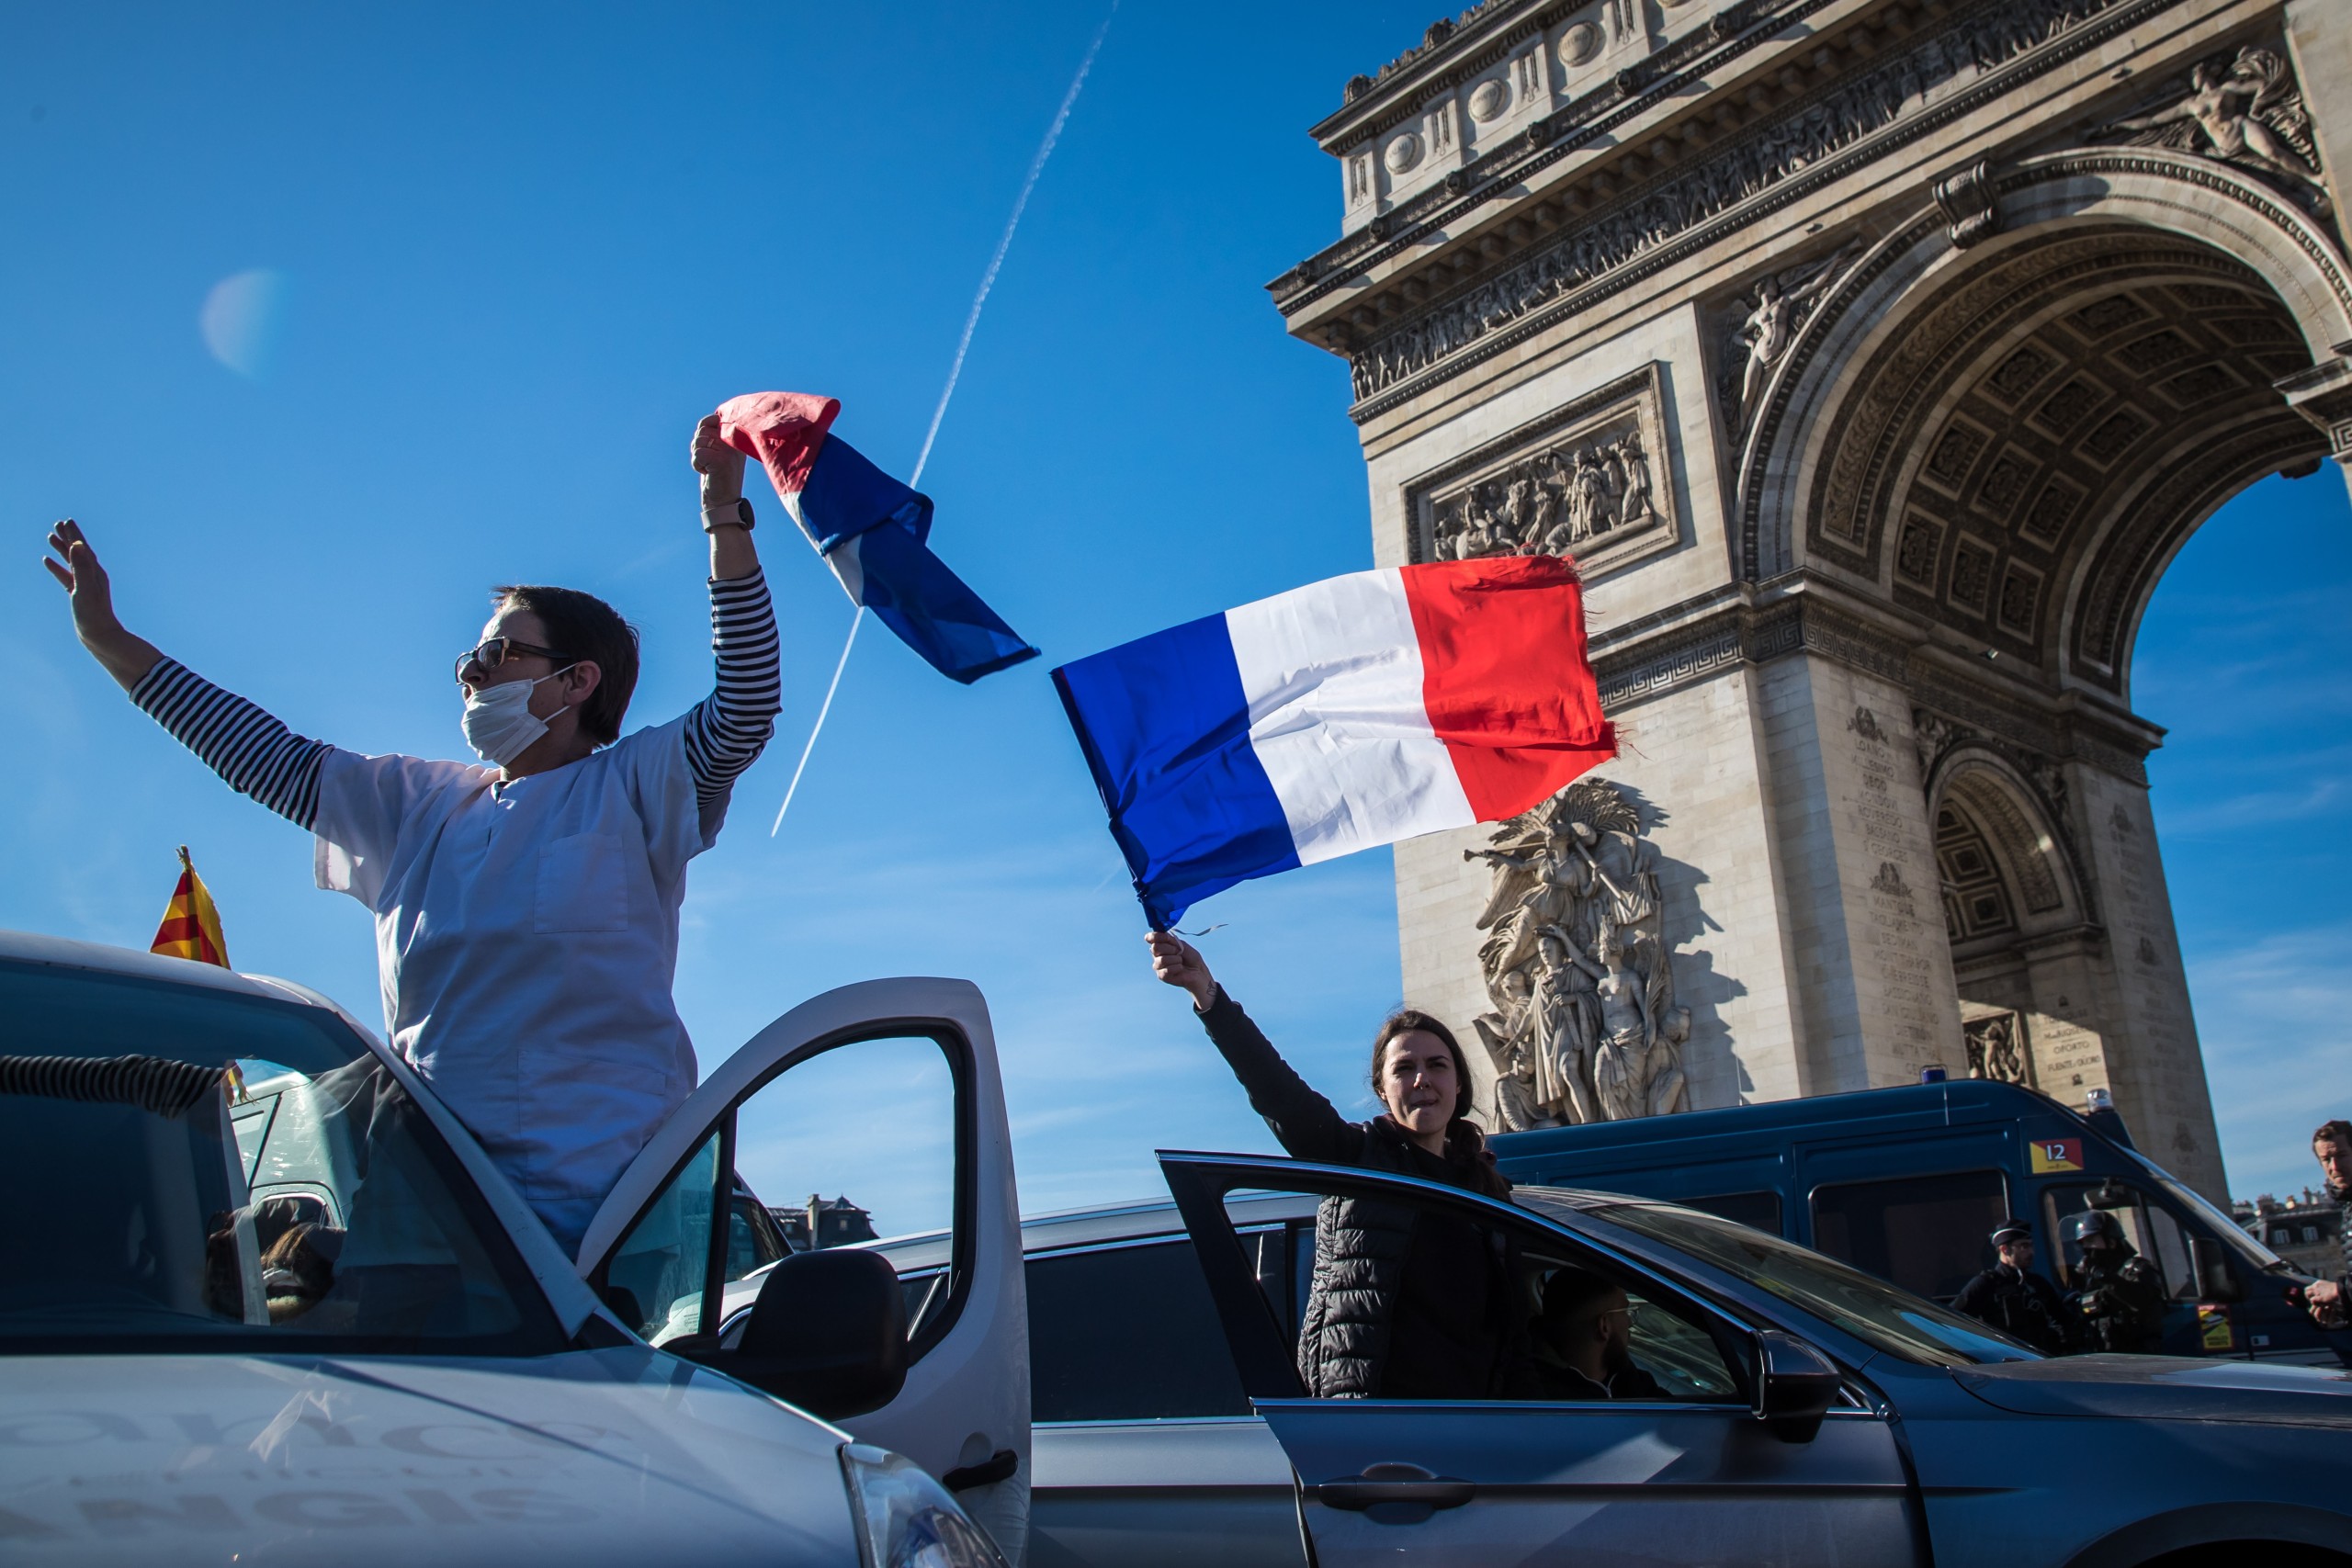 epa09749902 Participants in a so-called 'Freedom Convoy' stand on their cars and wave flags as they are trying to block the traffic on Champs Elysee in Paris, France, 12 February 2022. Paris police have prohibited the convoy, as announced by the capital's prefect on 10 February. A series of convoy demonstrations has been taking place in France to call for the lifting of all Covid-19-related restrictions and mandates, in light of the ongoing protest in Canada, where truck drivers have been rallying against the government-imposed mandatory Covid-19 vaccine to enter the country.  EPA/CHRISTOPHE PETIT TESSON